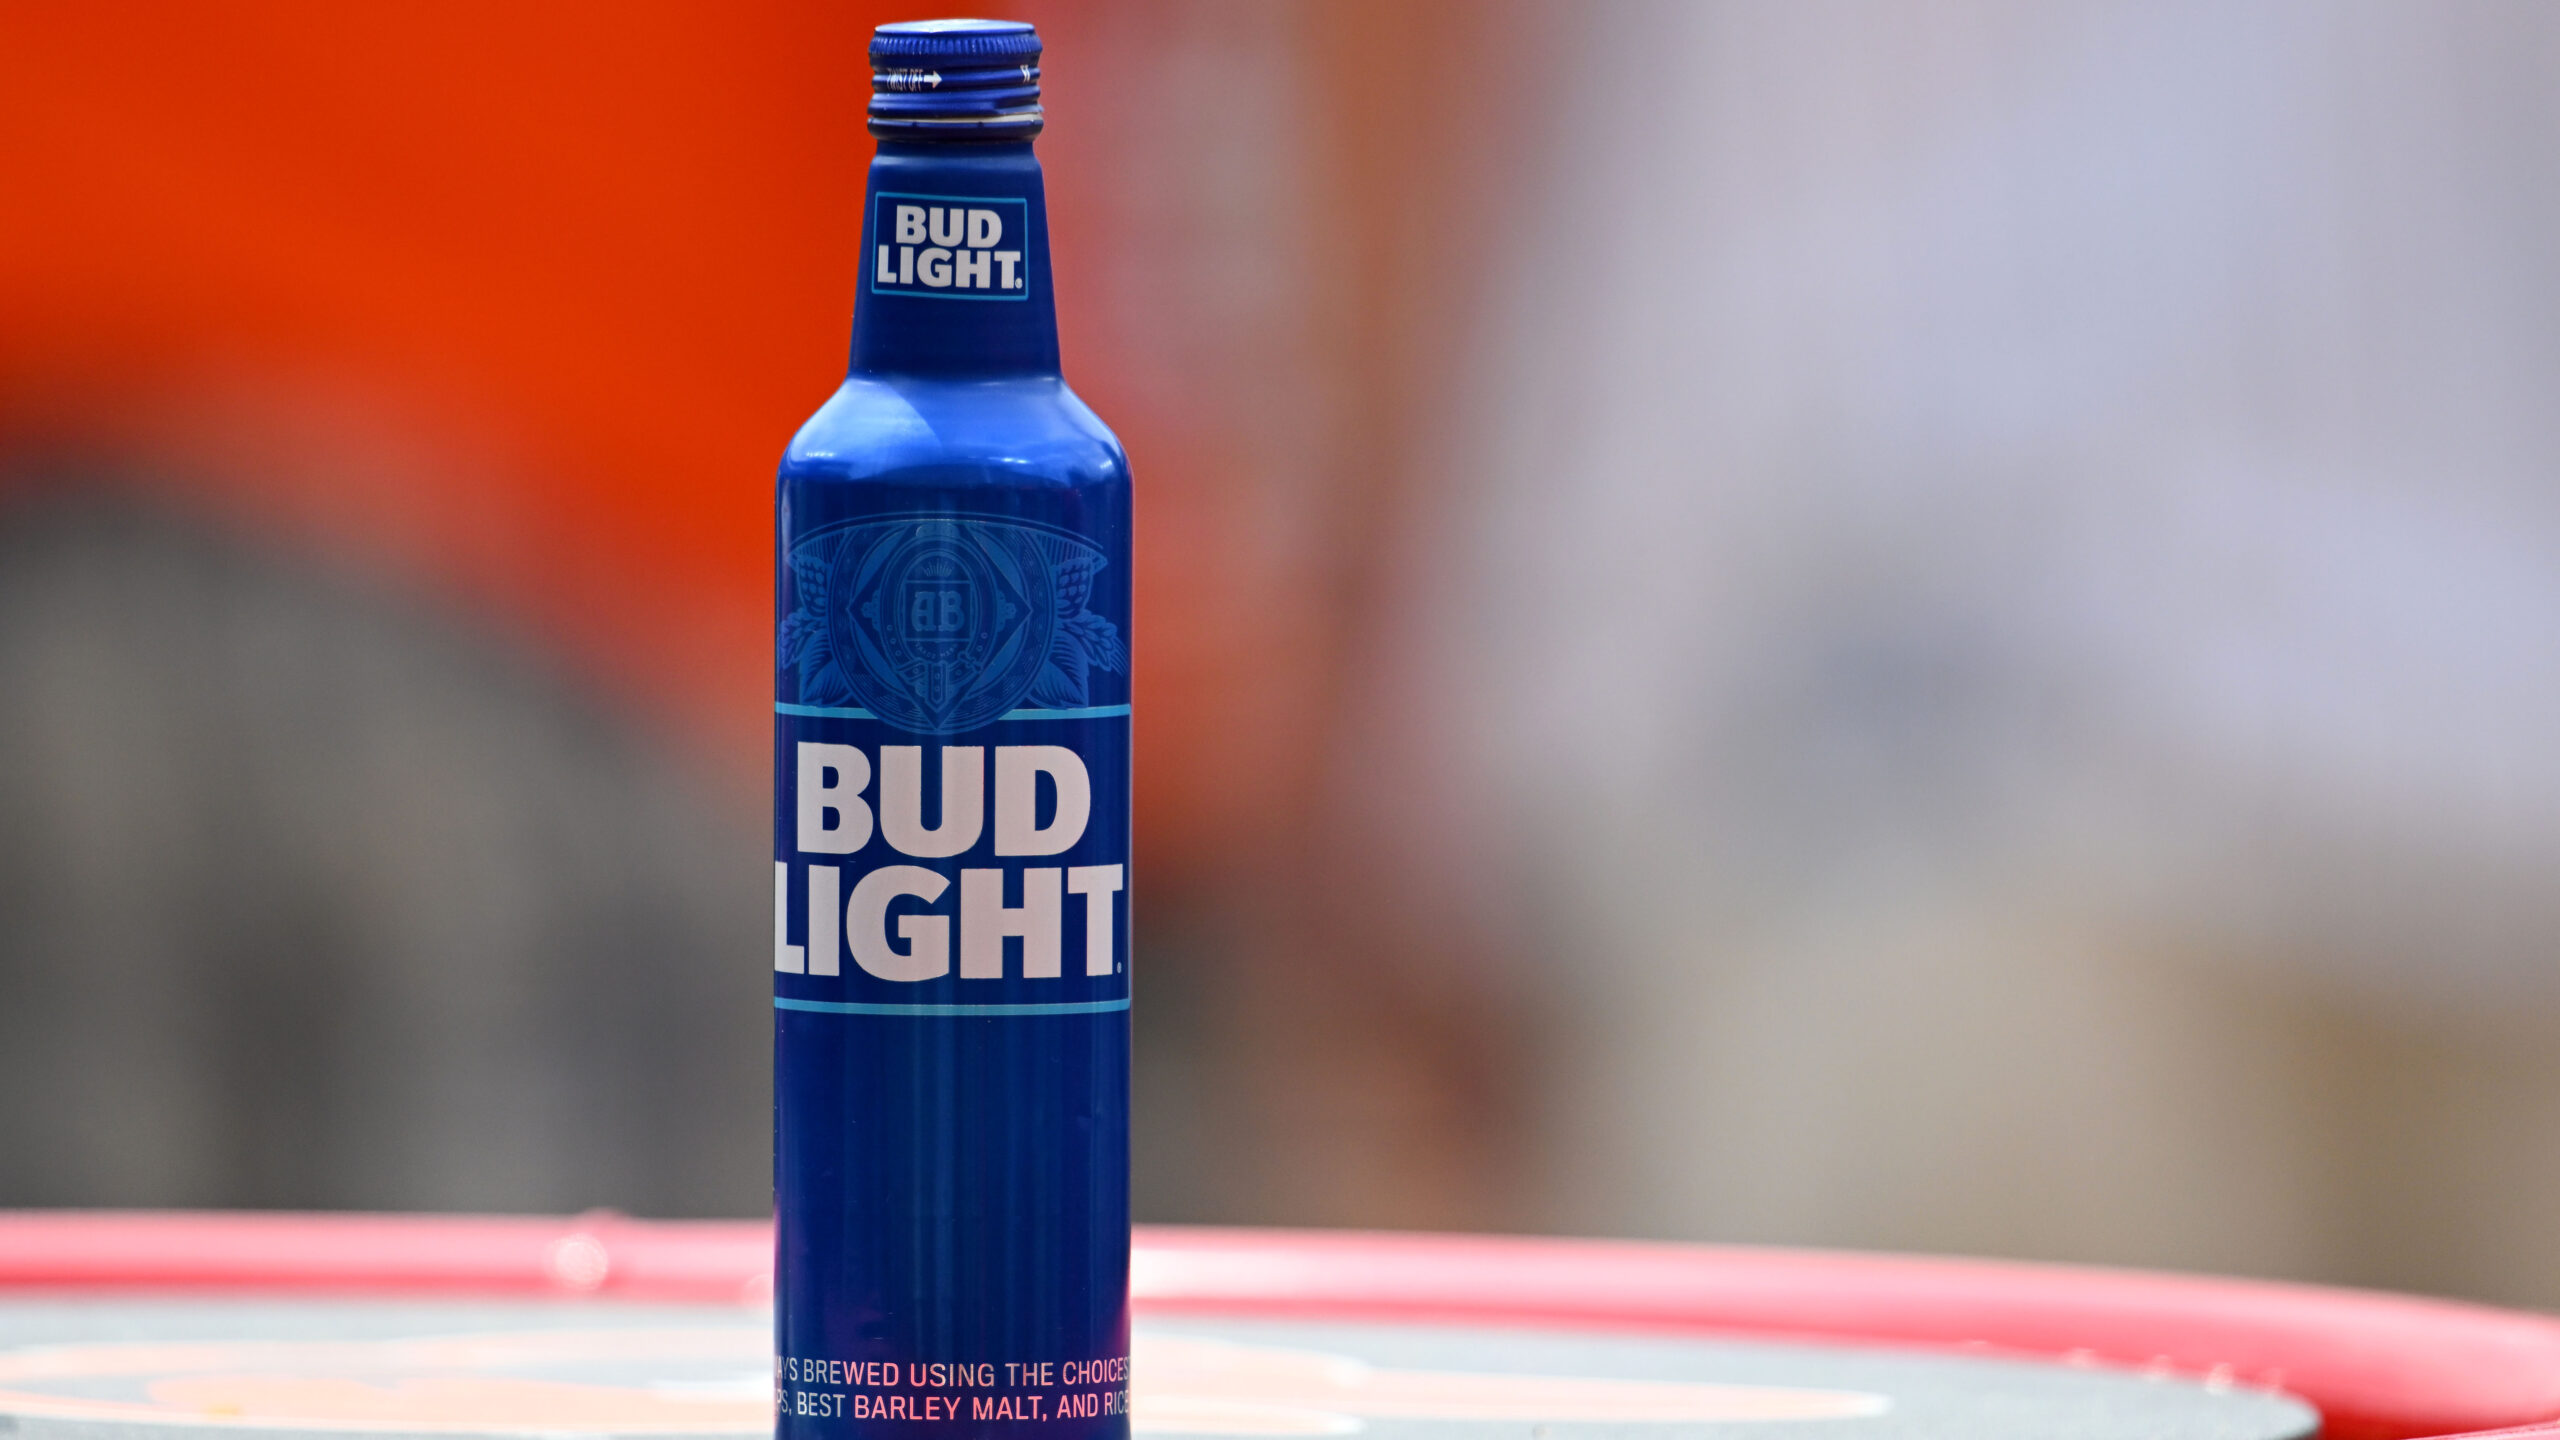 Anheuser-Busch responds to Bud Light backlash: ‘Beer is inclusive’